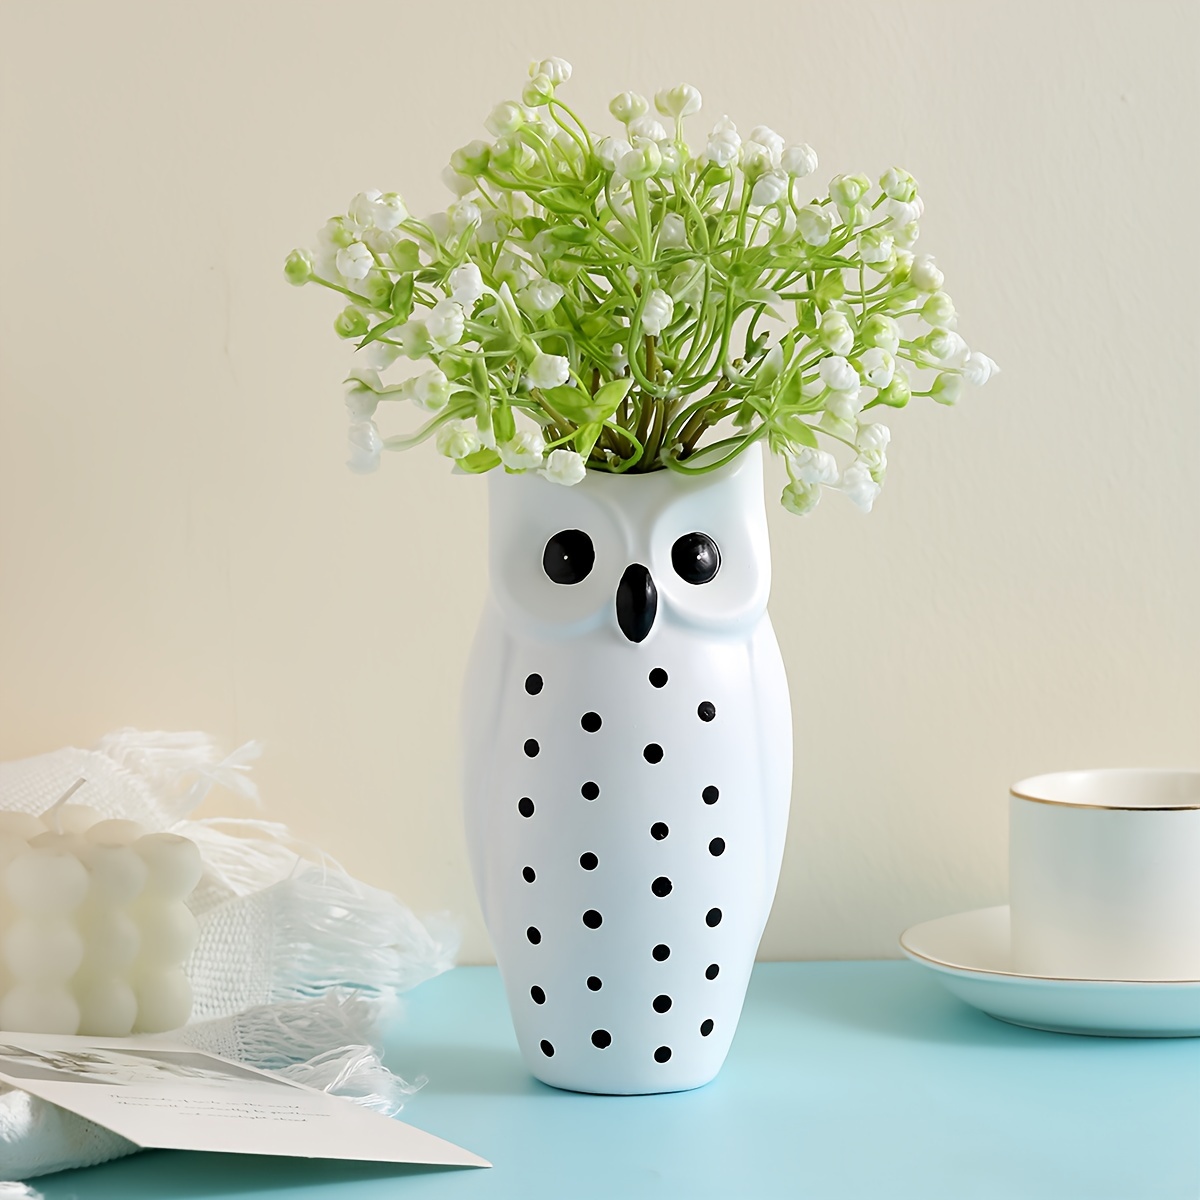 

Modern Owl-shaped Resin Vase For Dried Flowers - Perfect For Home Decor, Living Room, Bedroom, And Study Vases Home Decor Flower Vases Home Decor